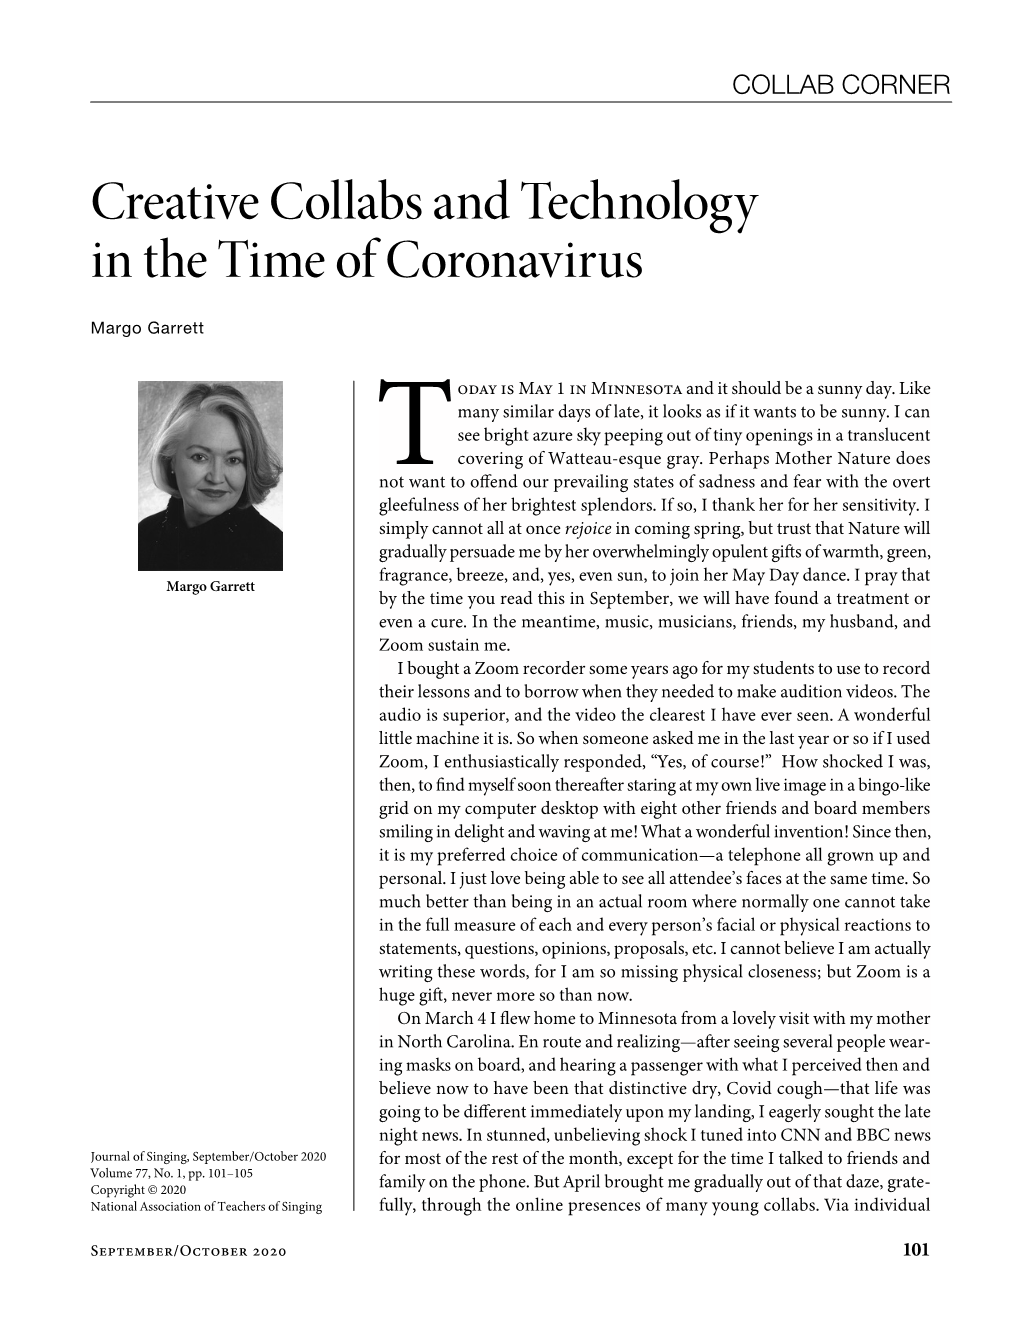 Creative Collabs and Technology in the Time of Coronavirus